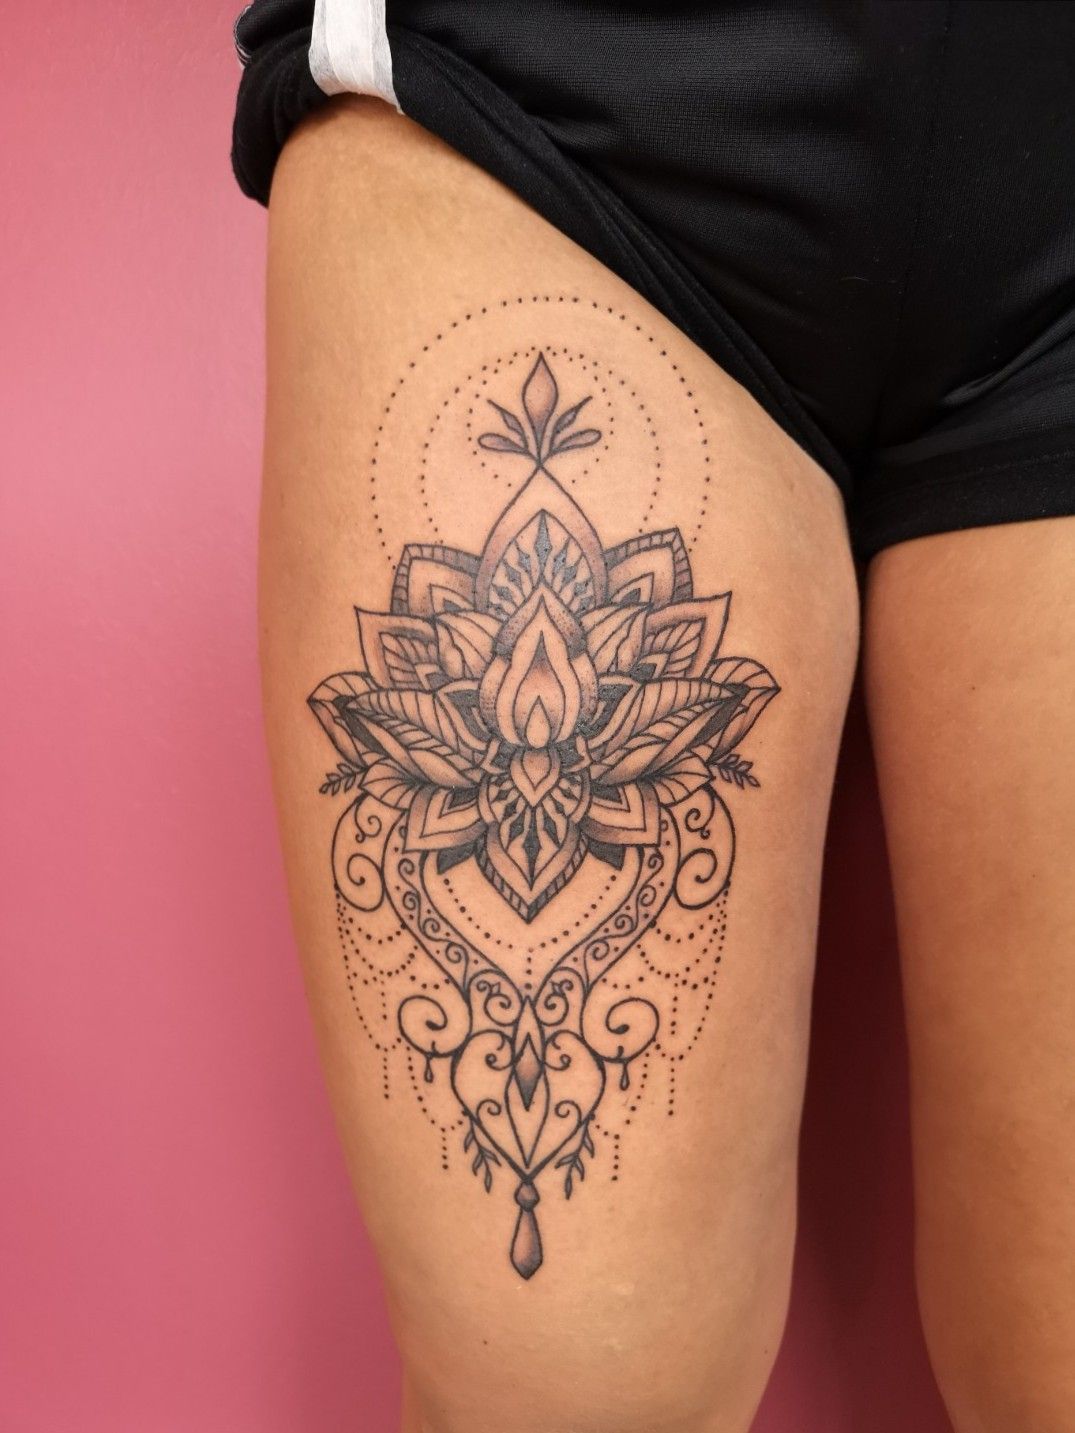 Symmetrical rib piece done by Matteo Pol at Tattoo Temple The Netherlands   rtattoos